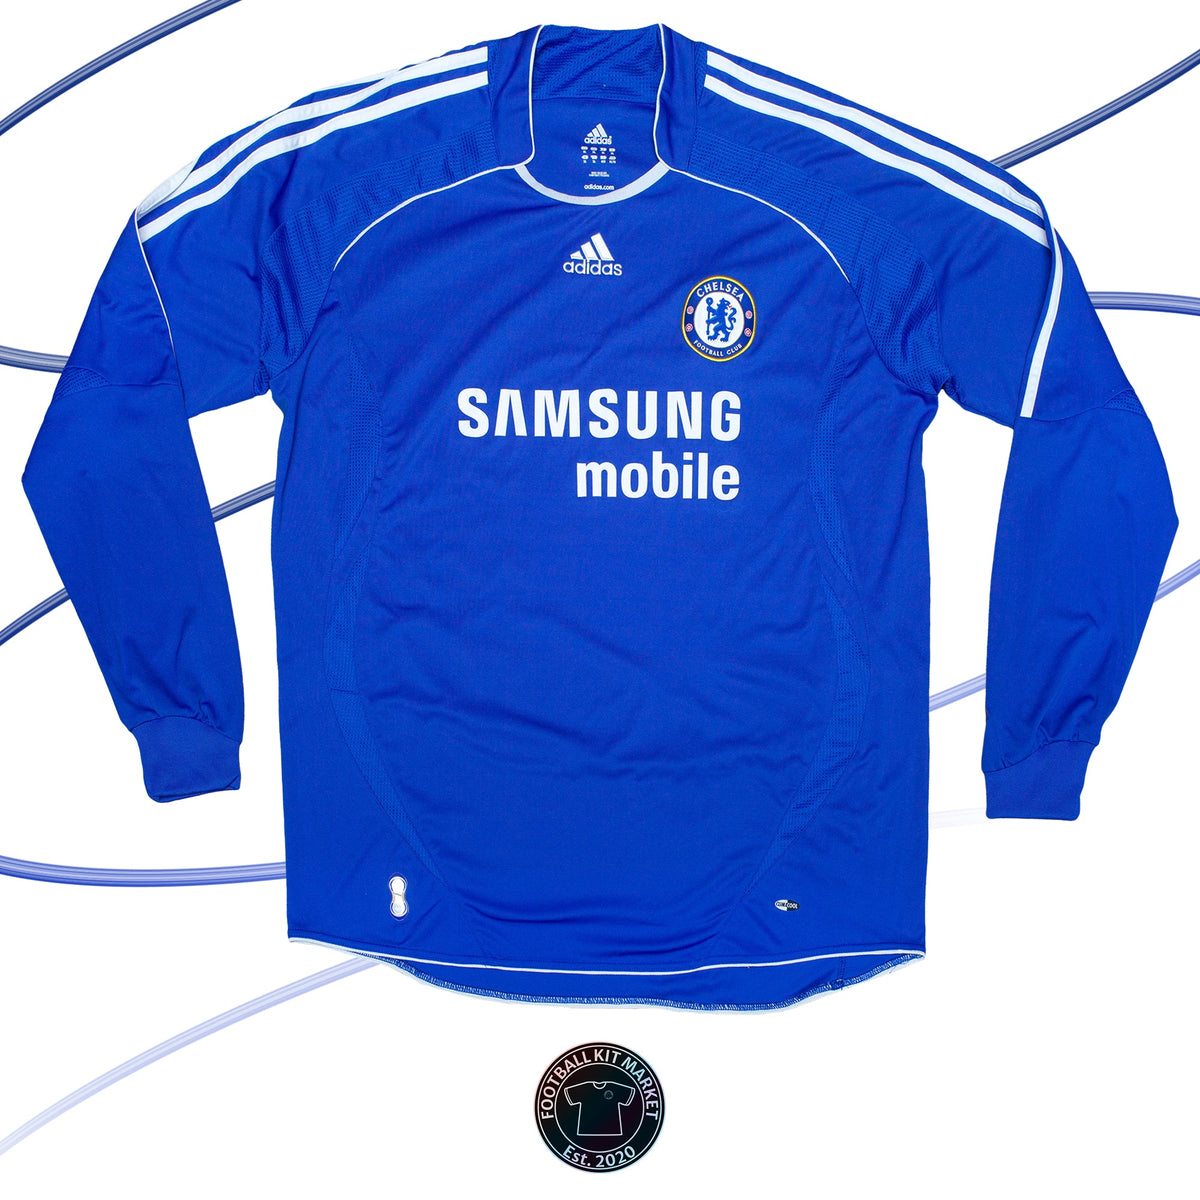 Genuine CHELSEA Home Shirt (2006-2008) - ADIDAS (XL) - Product Image from Football Kit Market